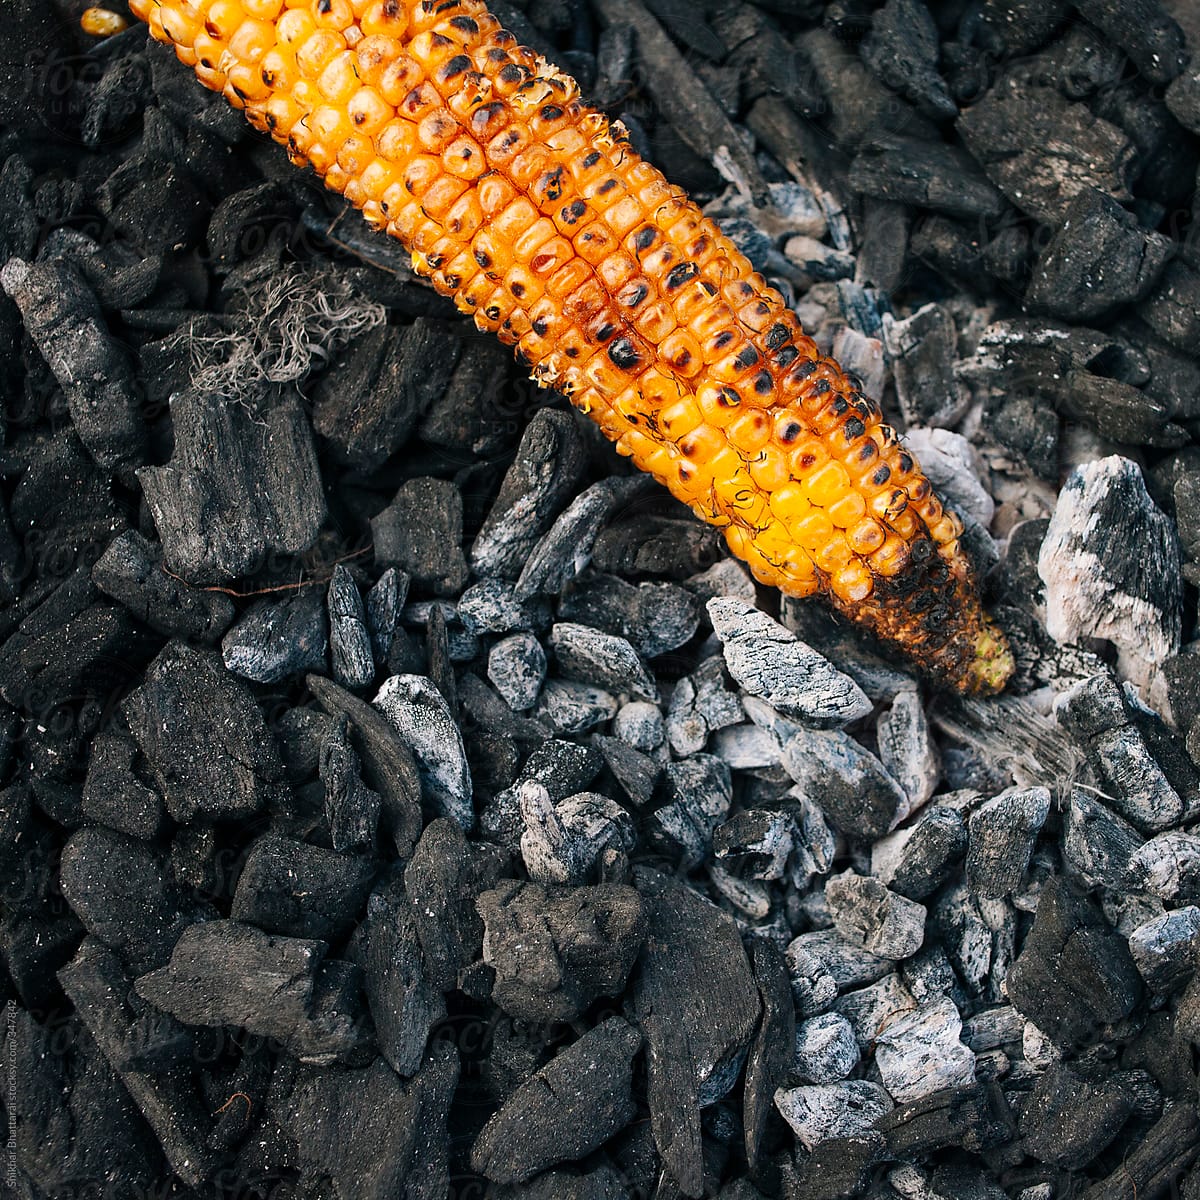 Hot barbecued corn on top of wood coals being sold in Asia.